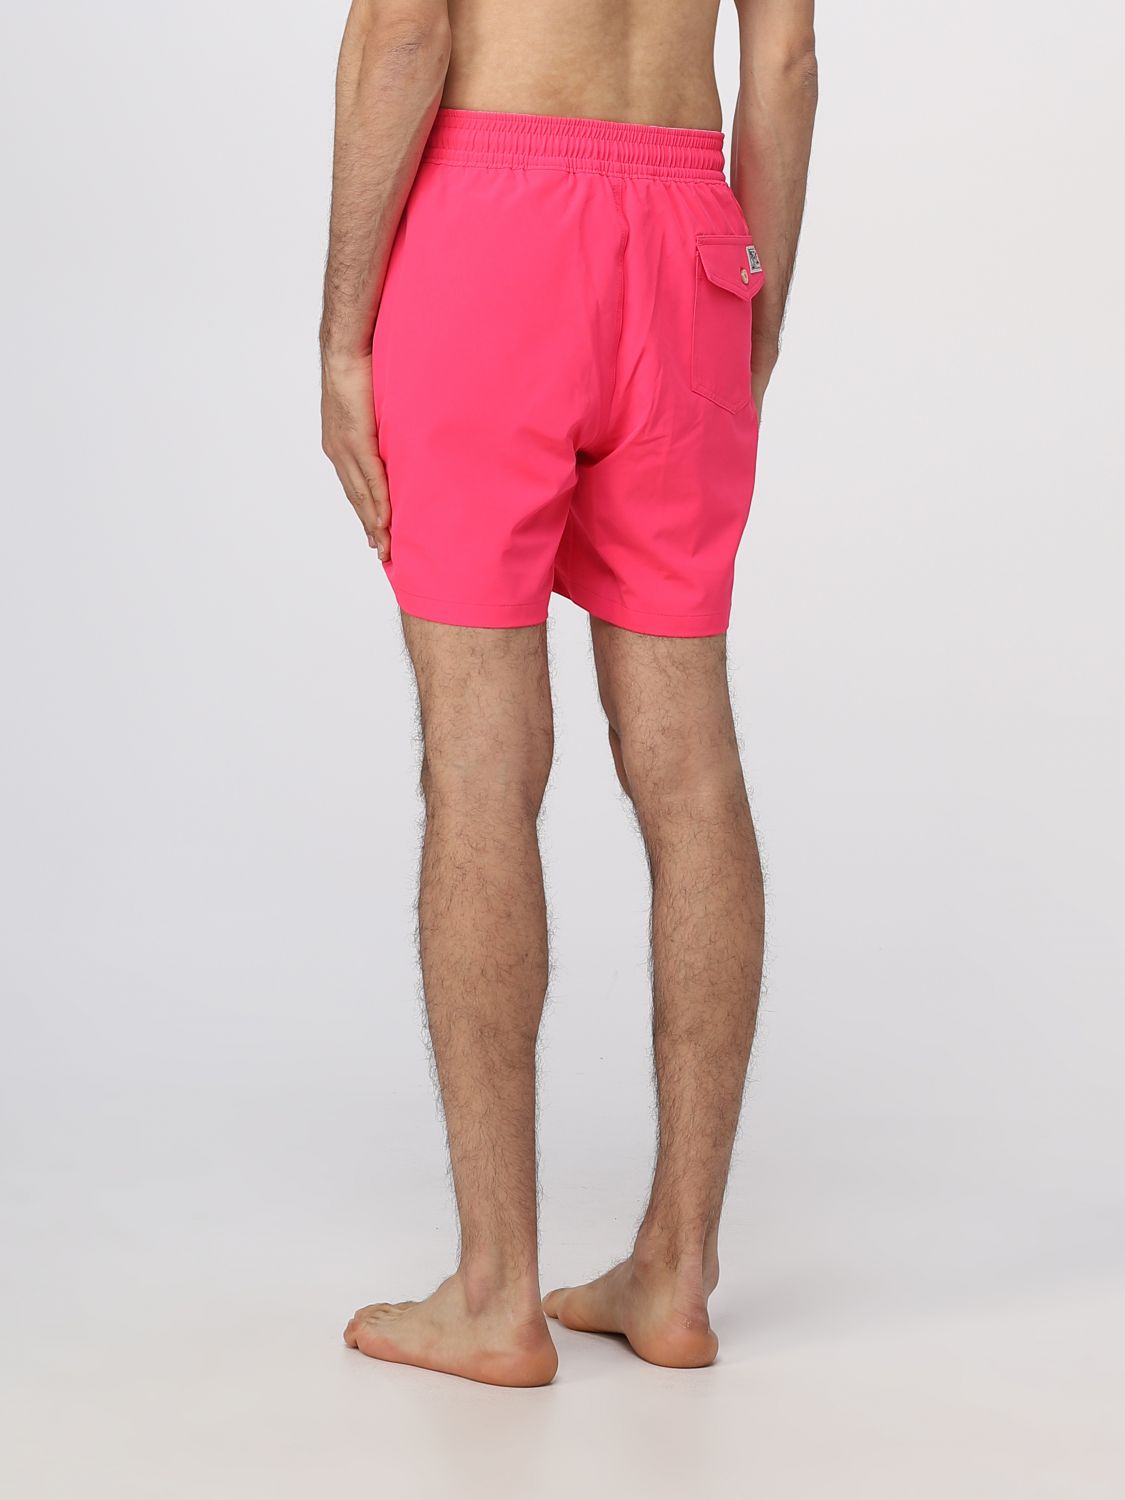 Pickering Ved daggry nedenunder POLO RALPH LAUREN: swimsuit for man - Baby Pink | Polo Ralph Lauren  swimsuit 710901591 online on GIGLIO.COM